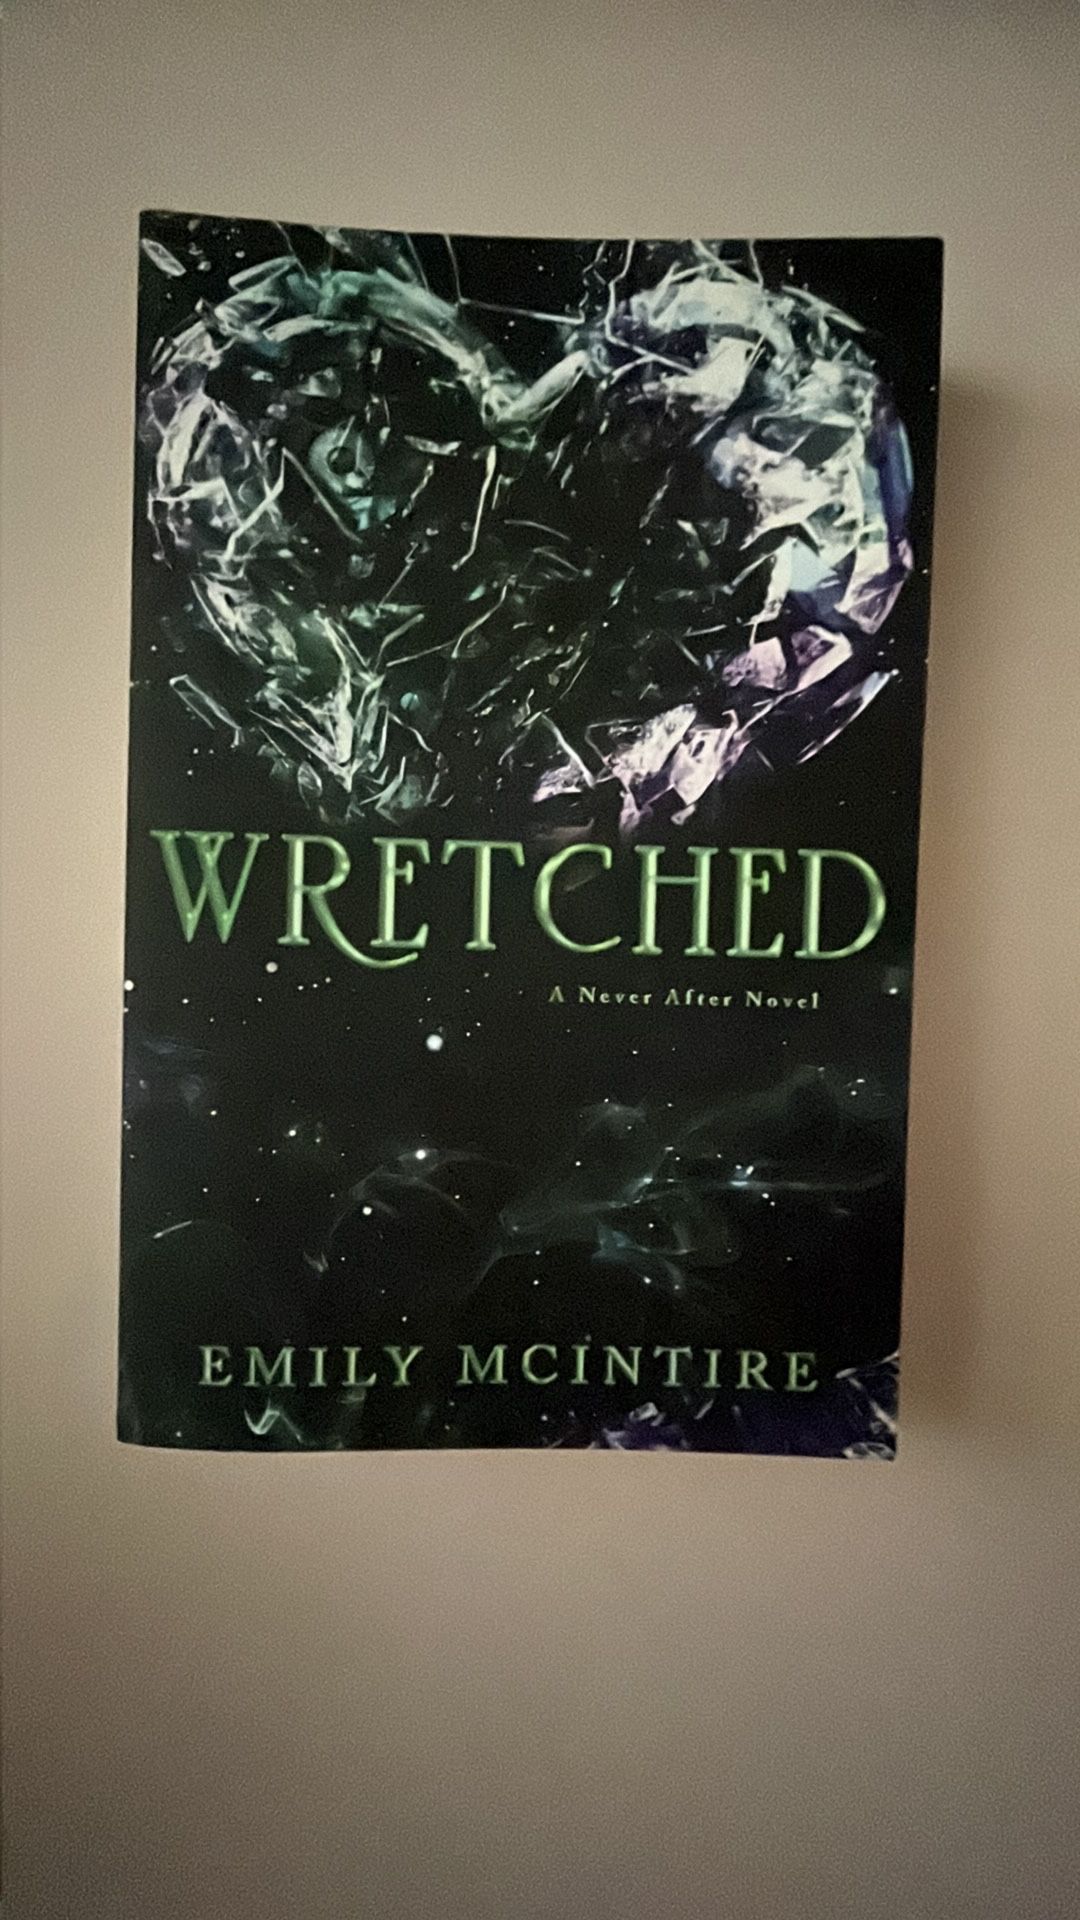 Wretched by Emily Mcintire 